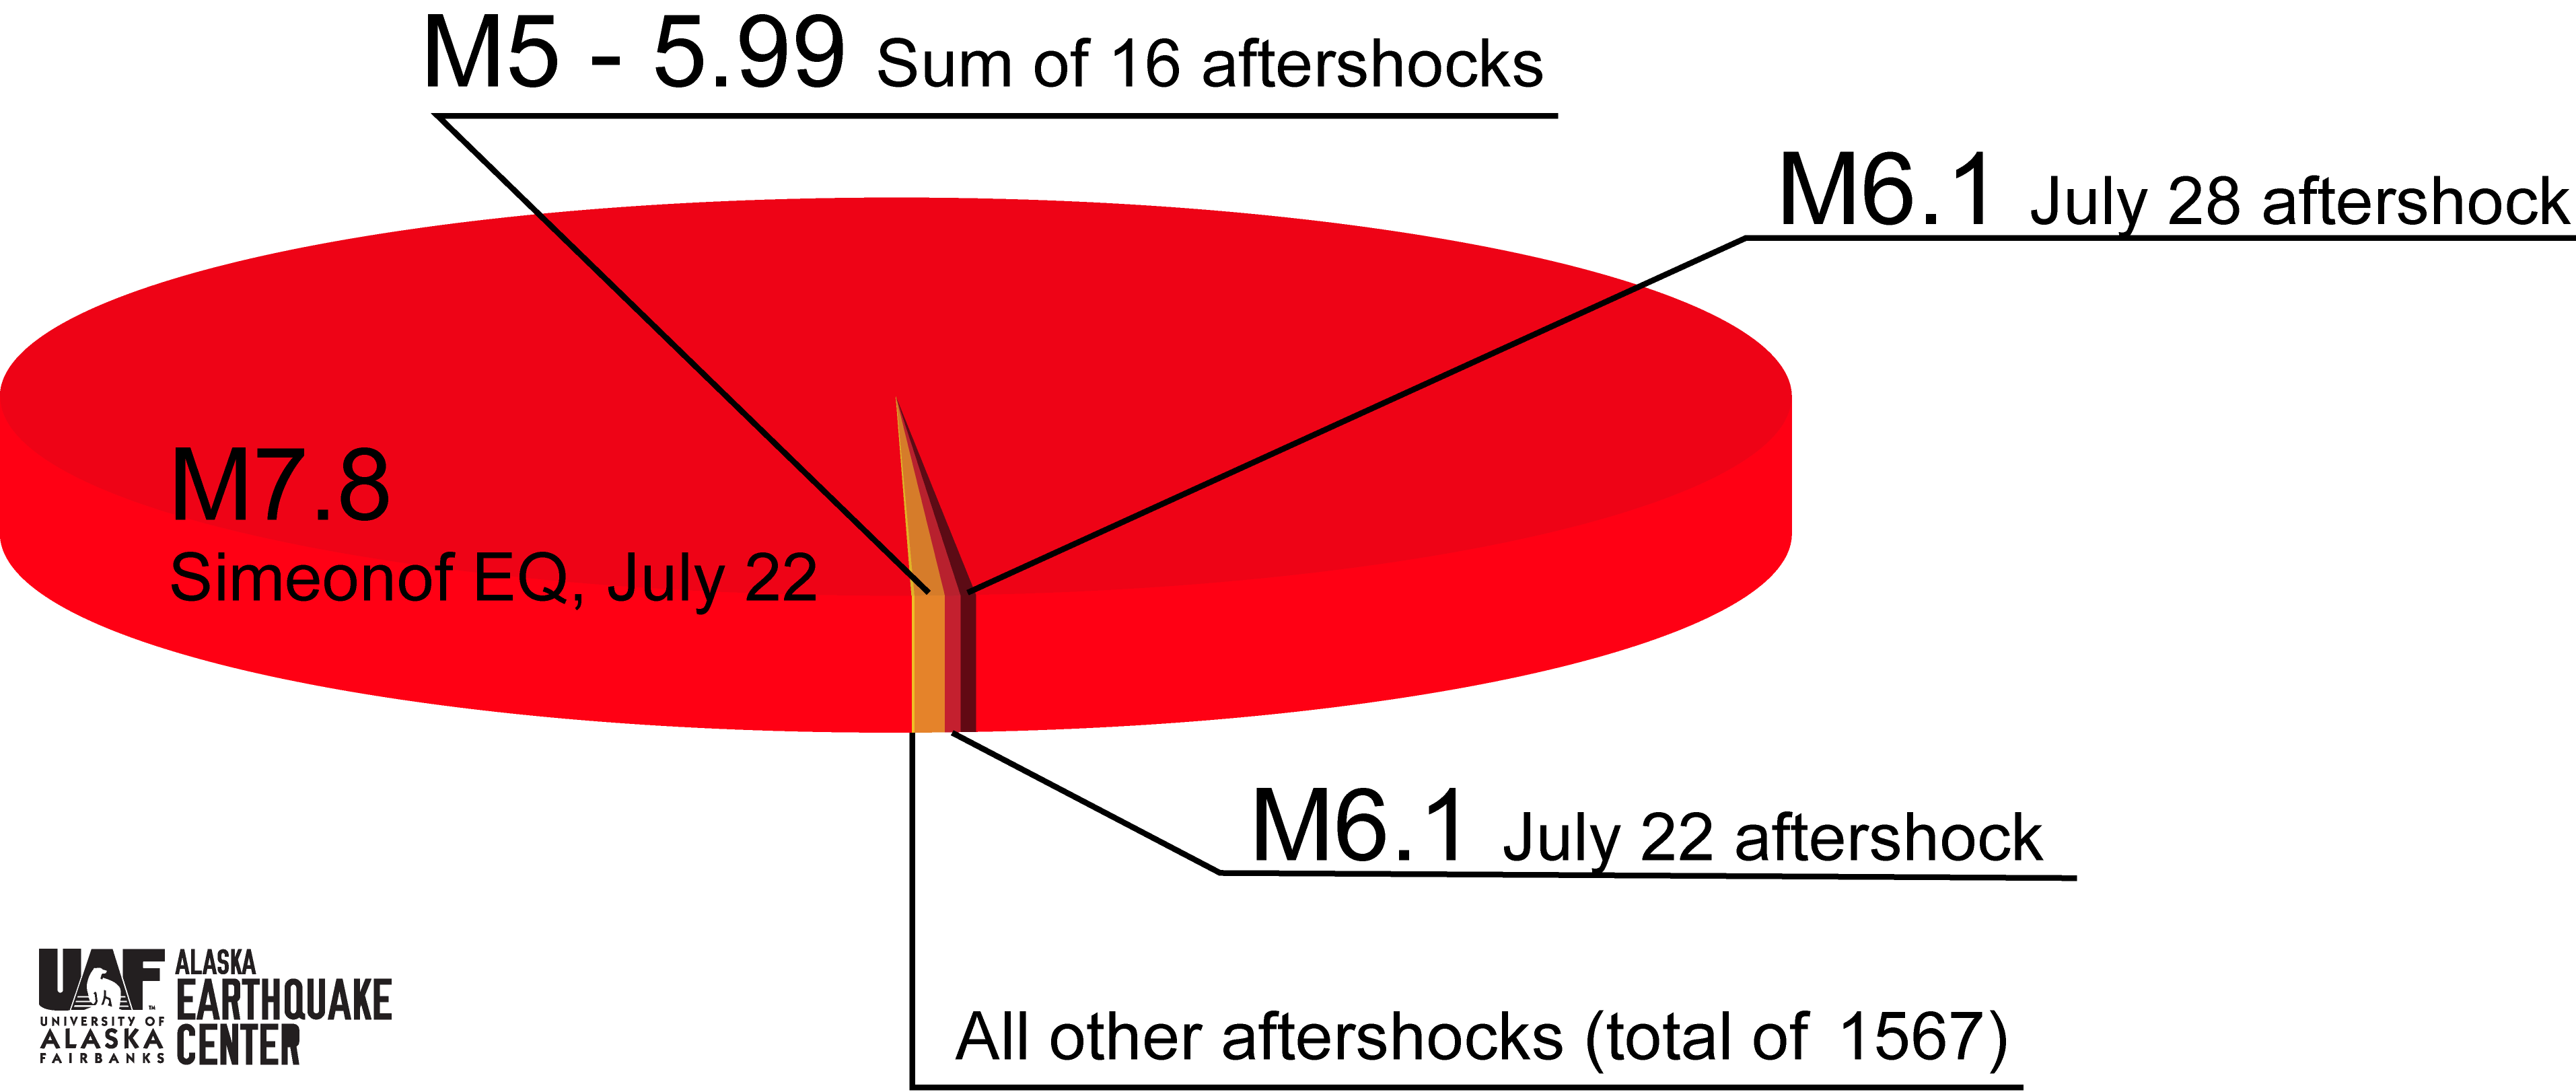 The pie chart here shows the energy comparisons between the Simeonof mainshock.